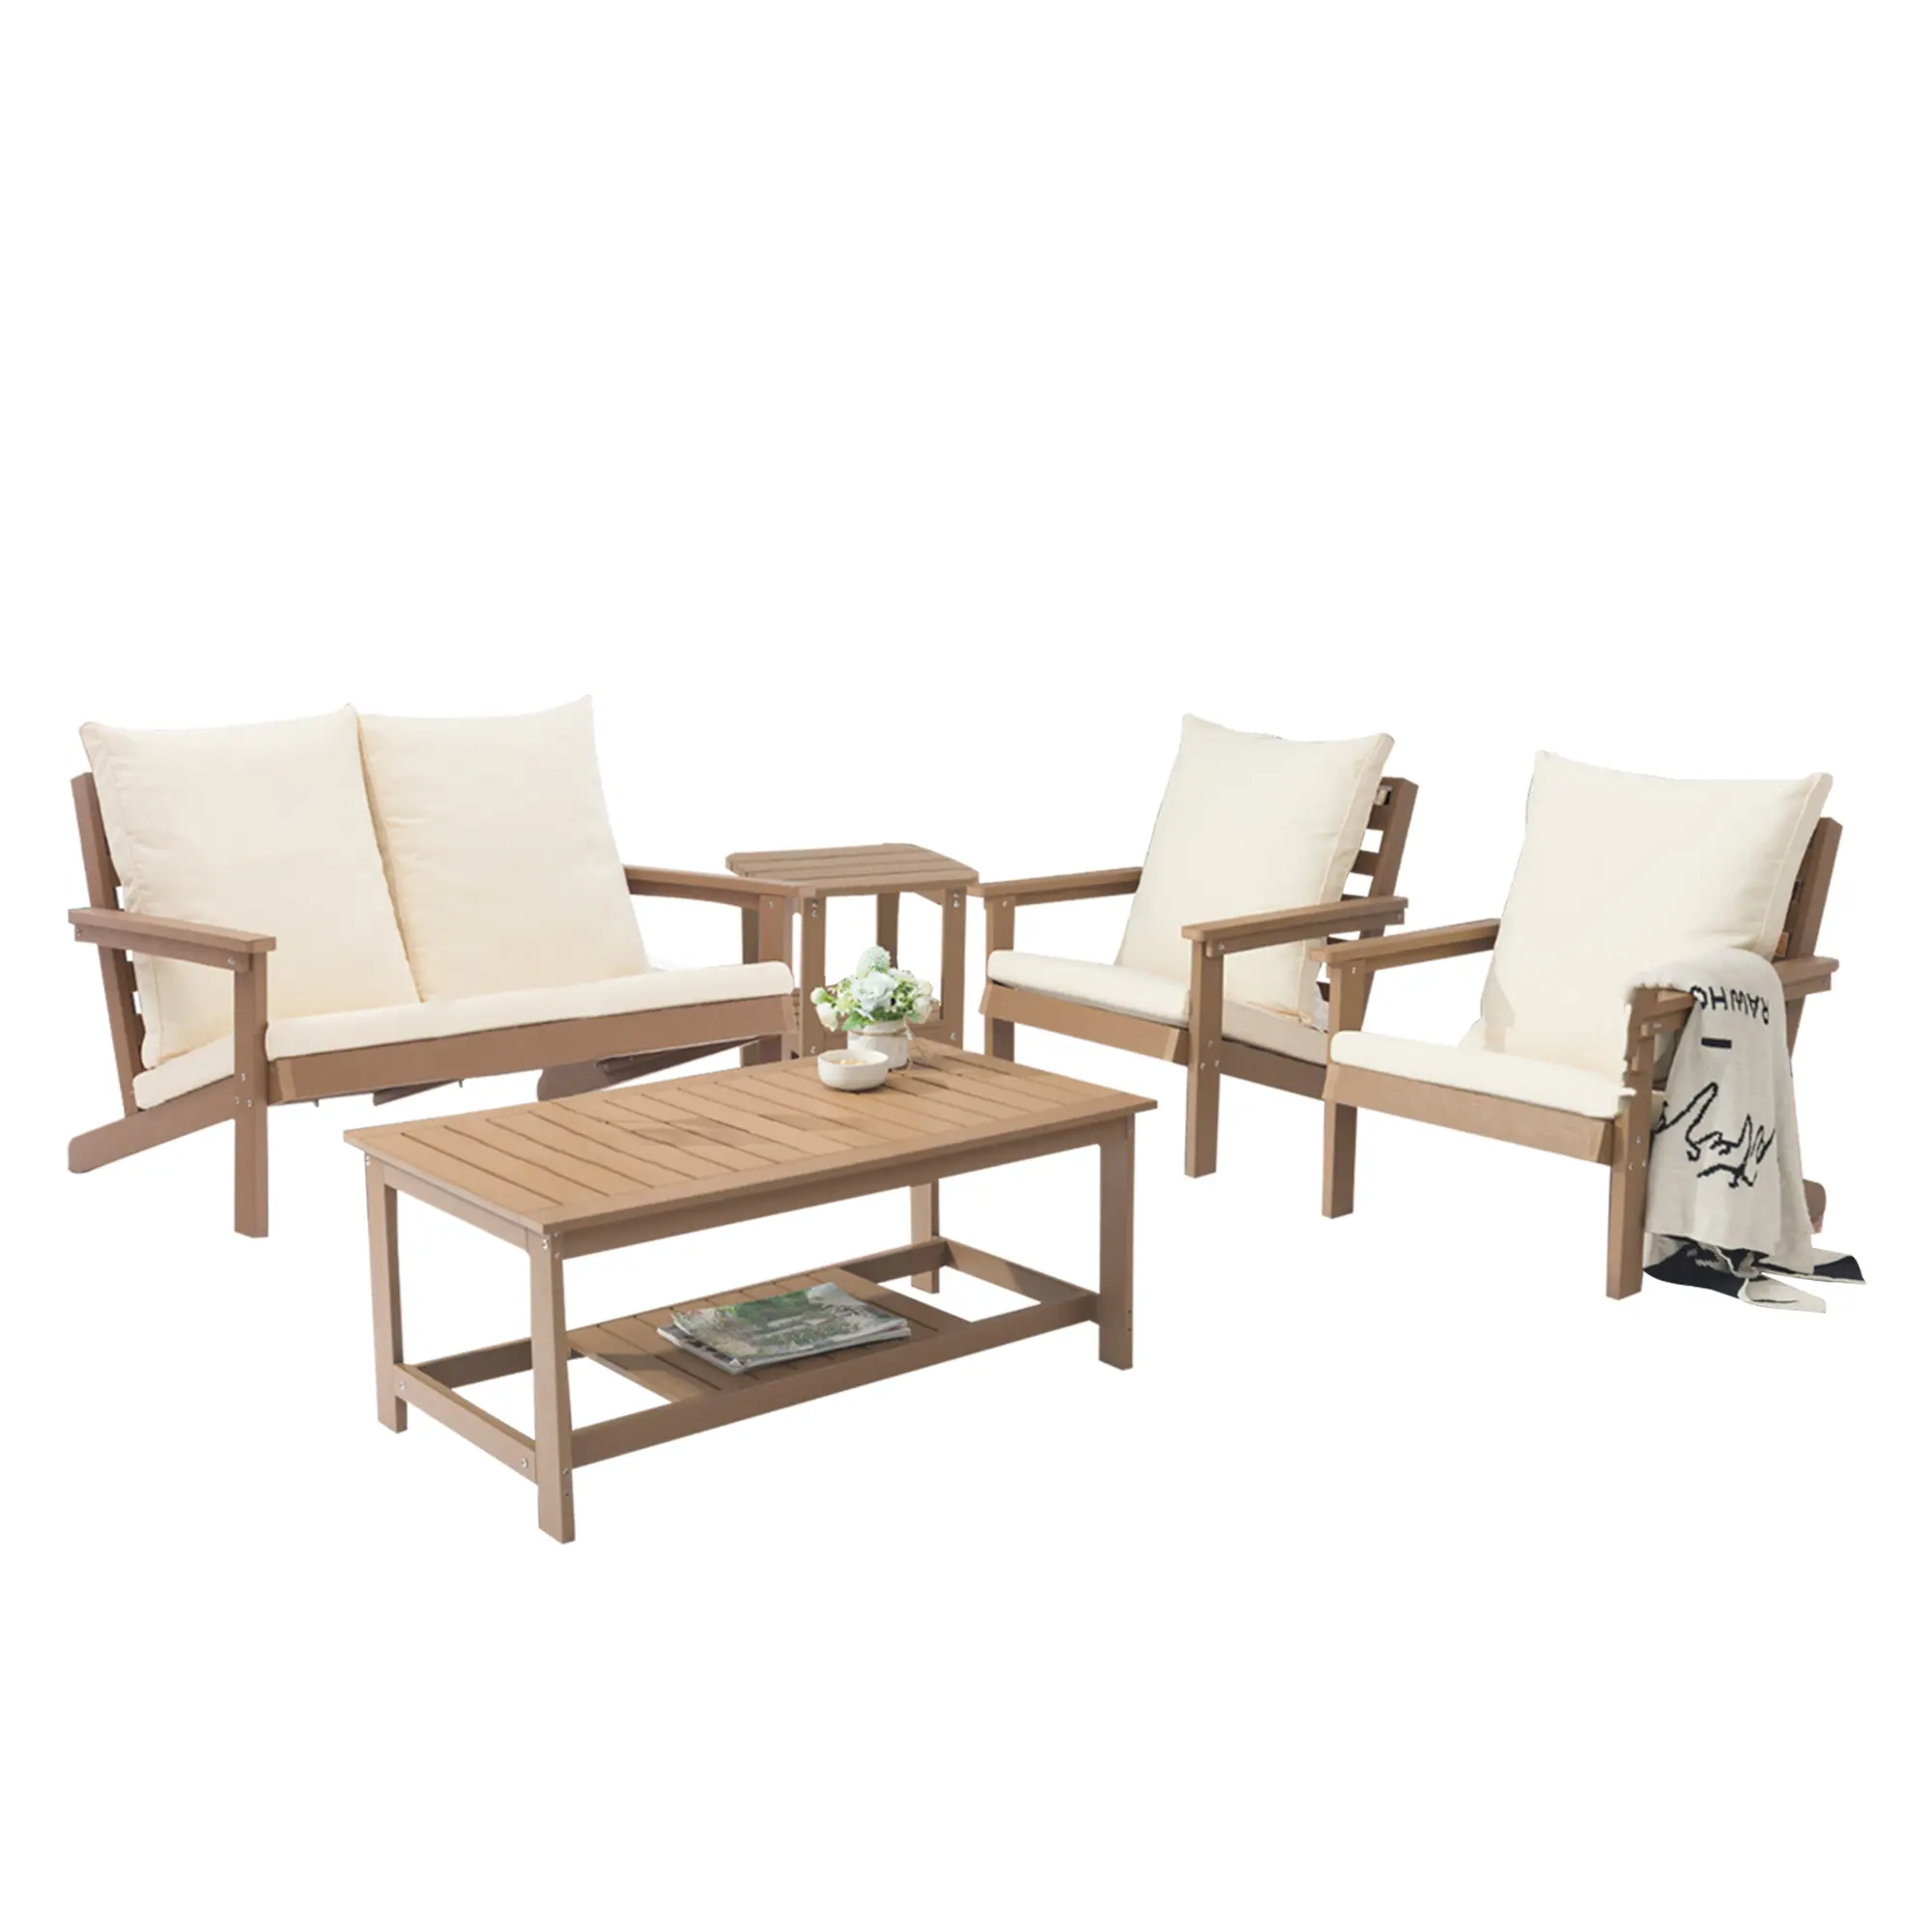 5-Piece Patio Furniture Set with Loveseat, 2 Lounge Chairs, Coffee Table and Side Table